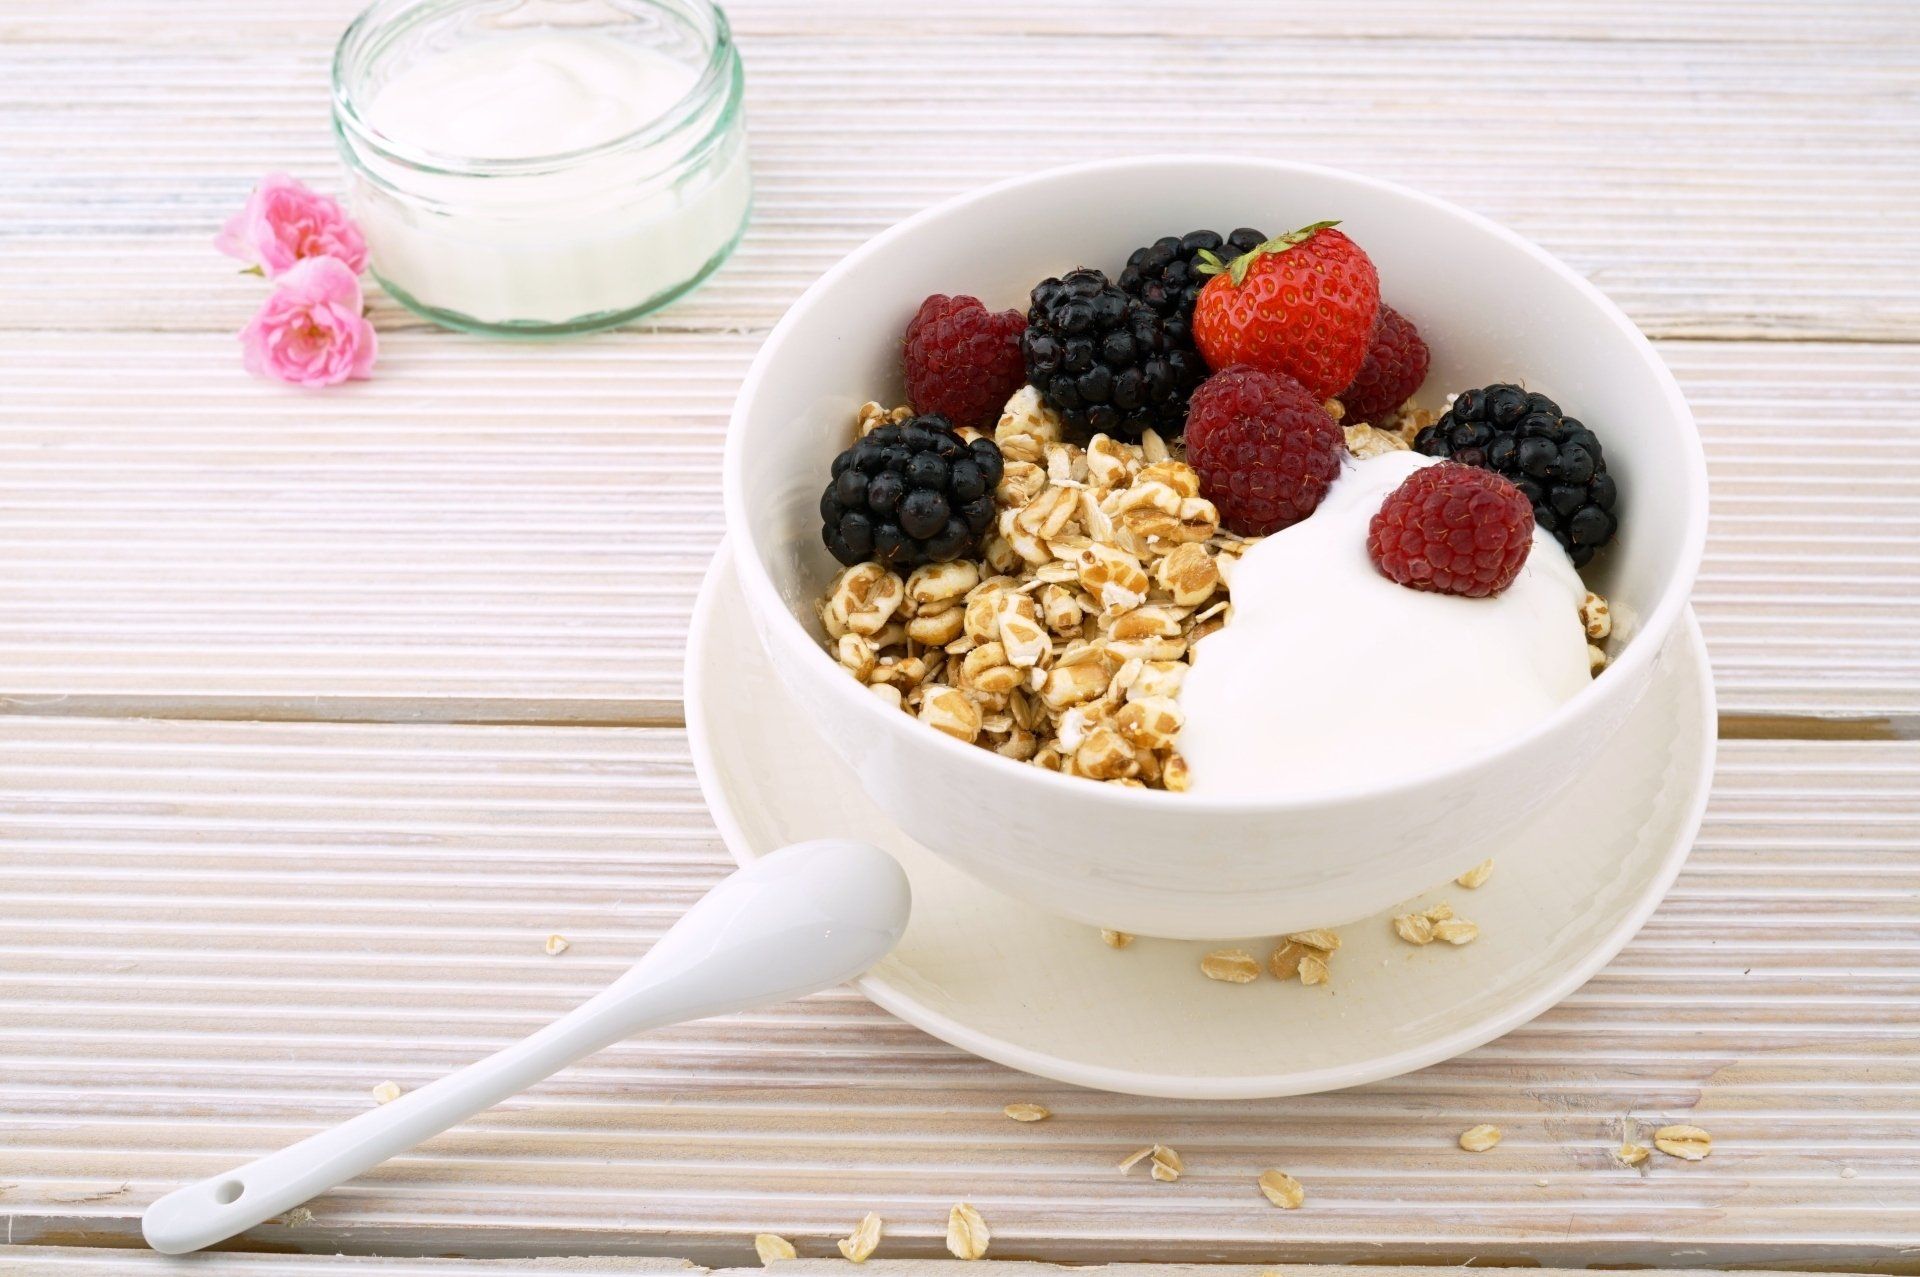 A bowl of oatmeal with berries and yogurt on a wooden table.